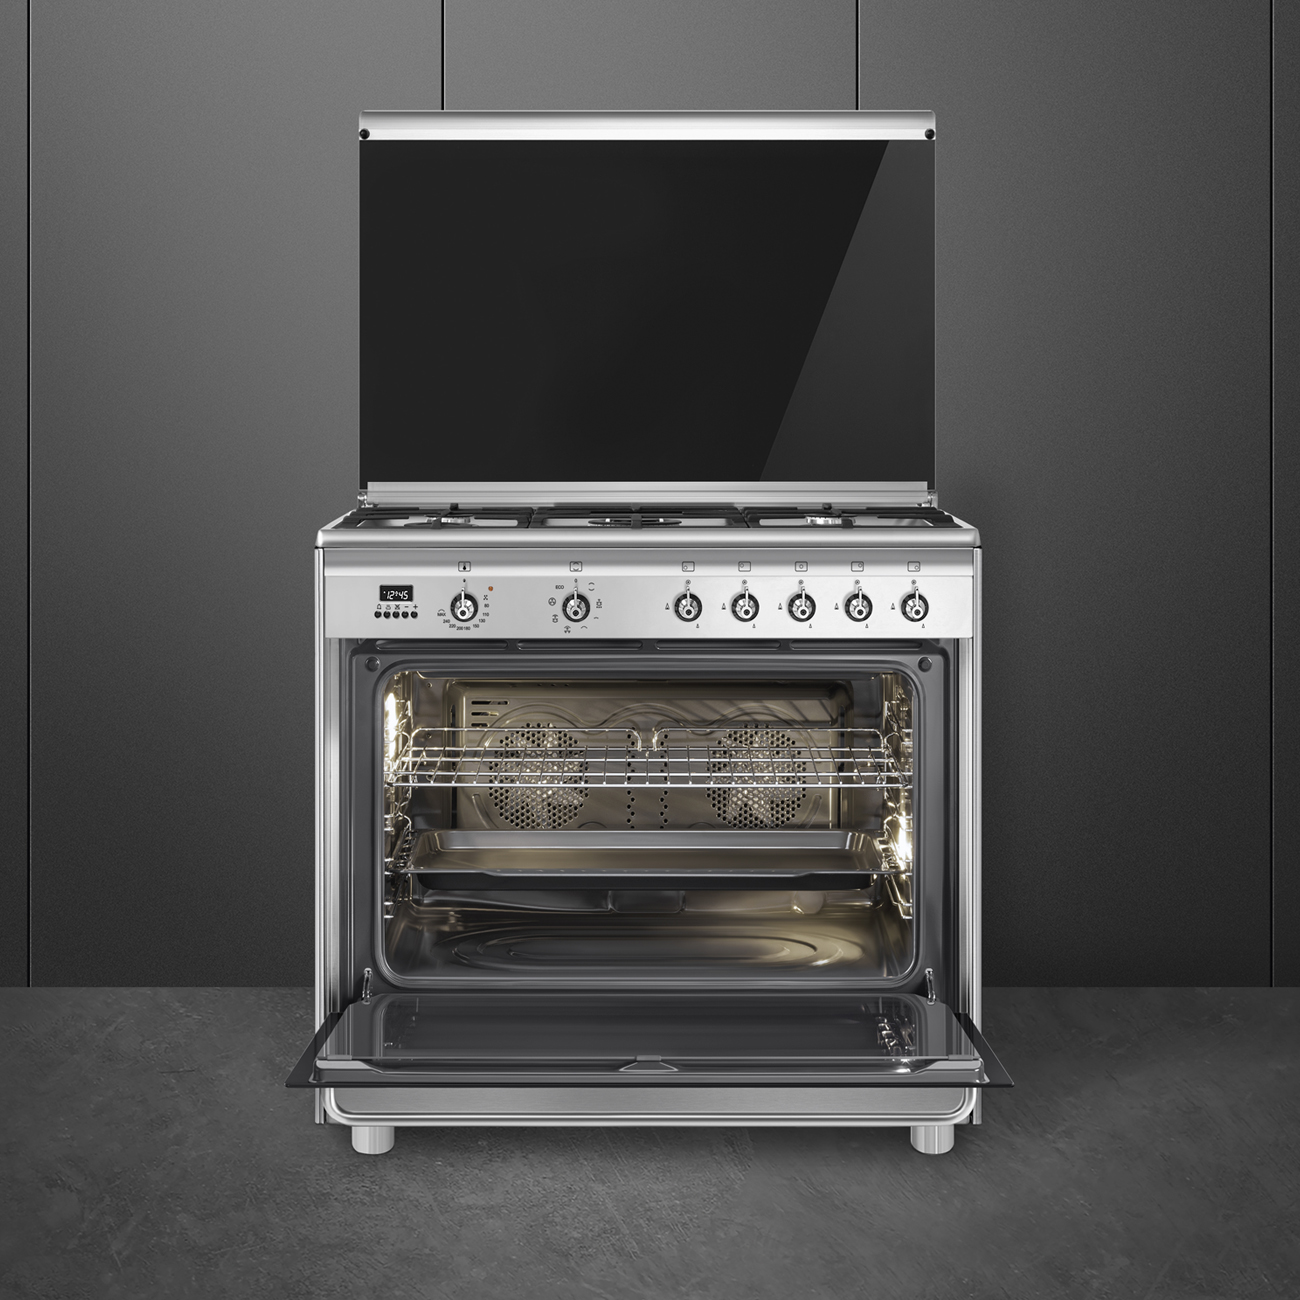 Smeg Stainless steel Cooker with Gas Hob_2